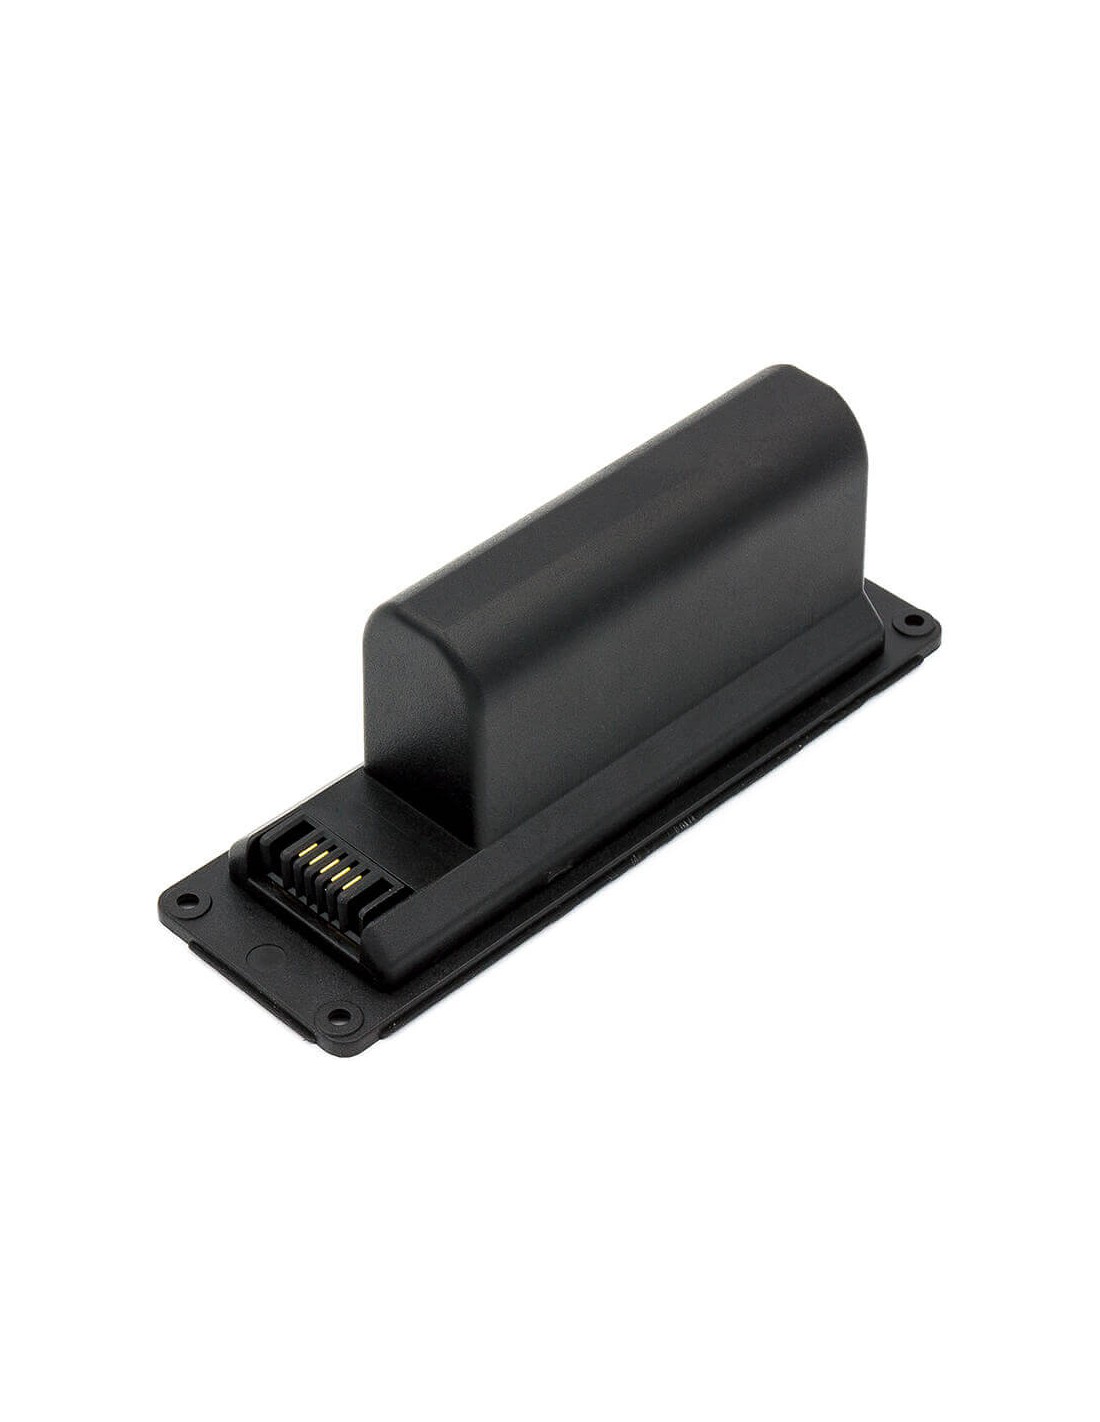 Bose Soundlink Mini replacement battery